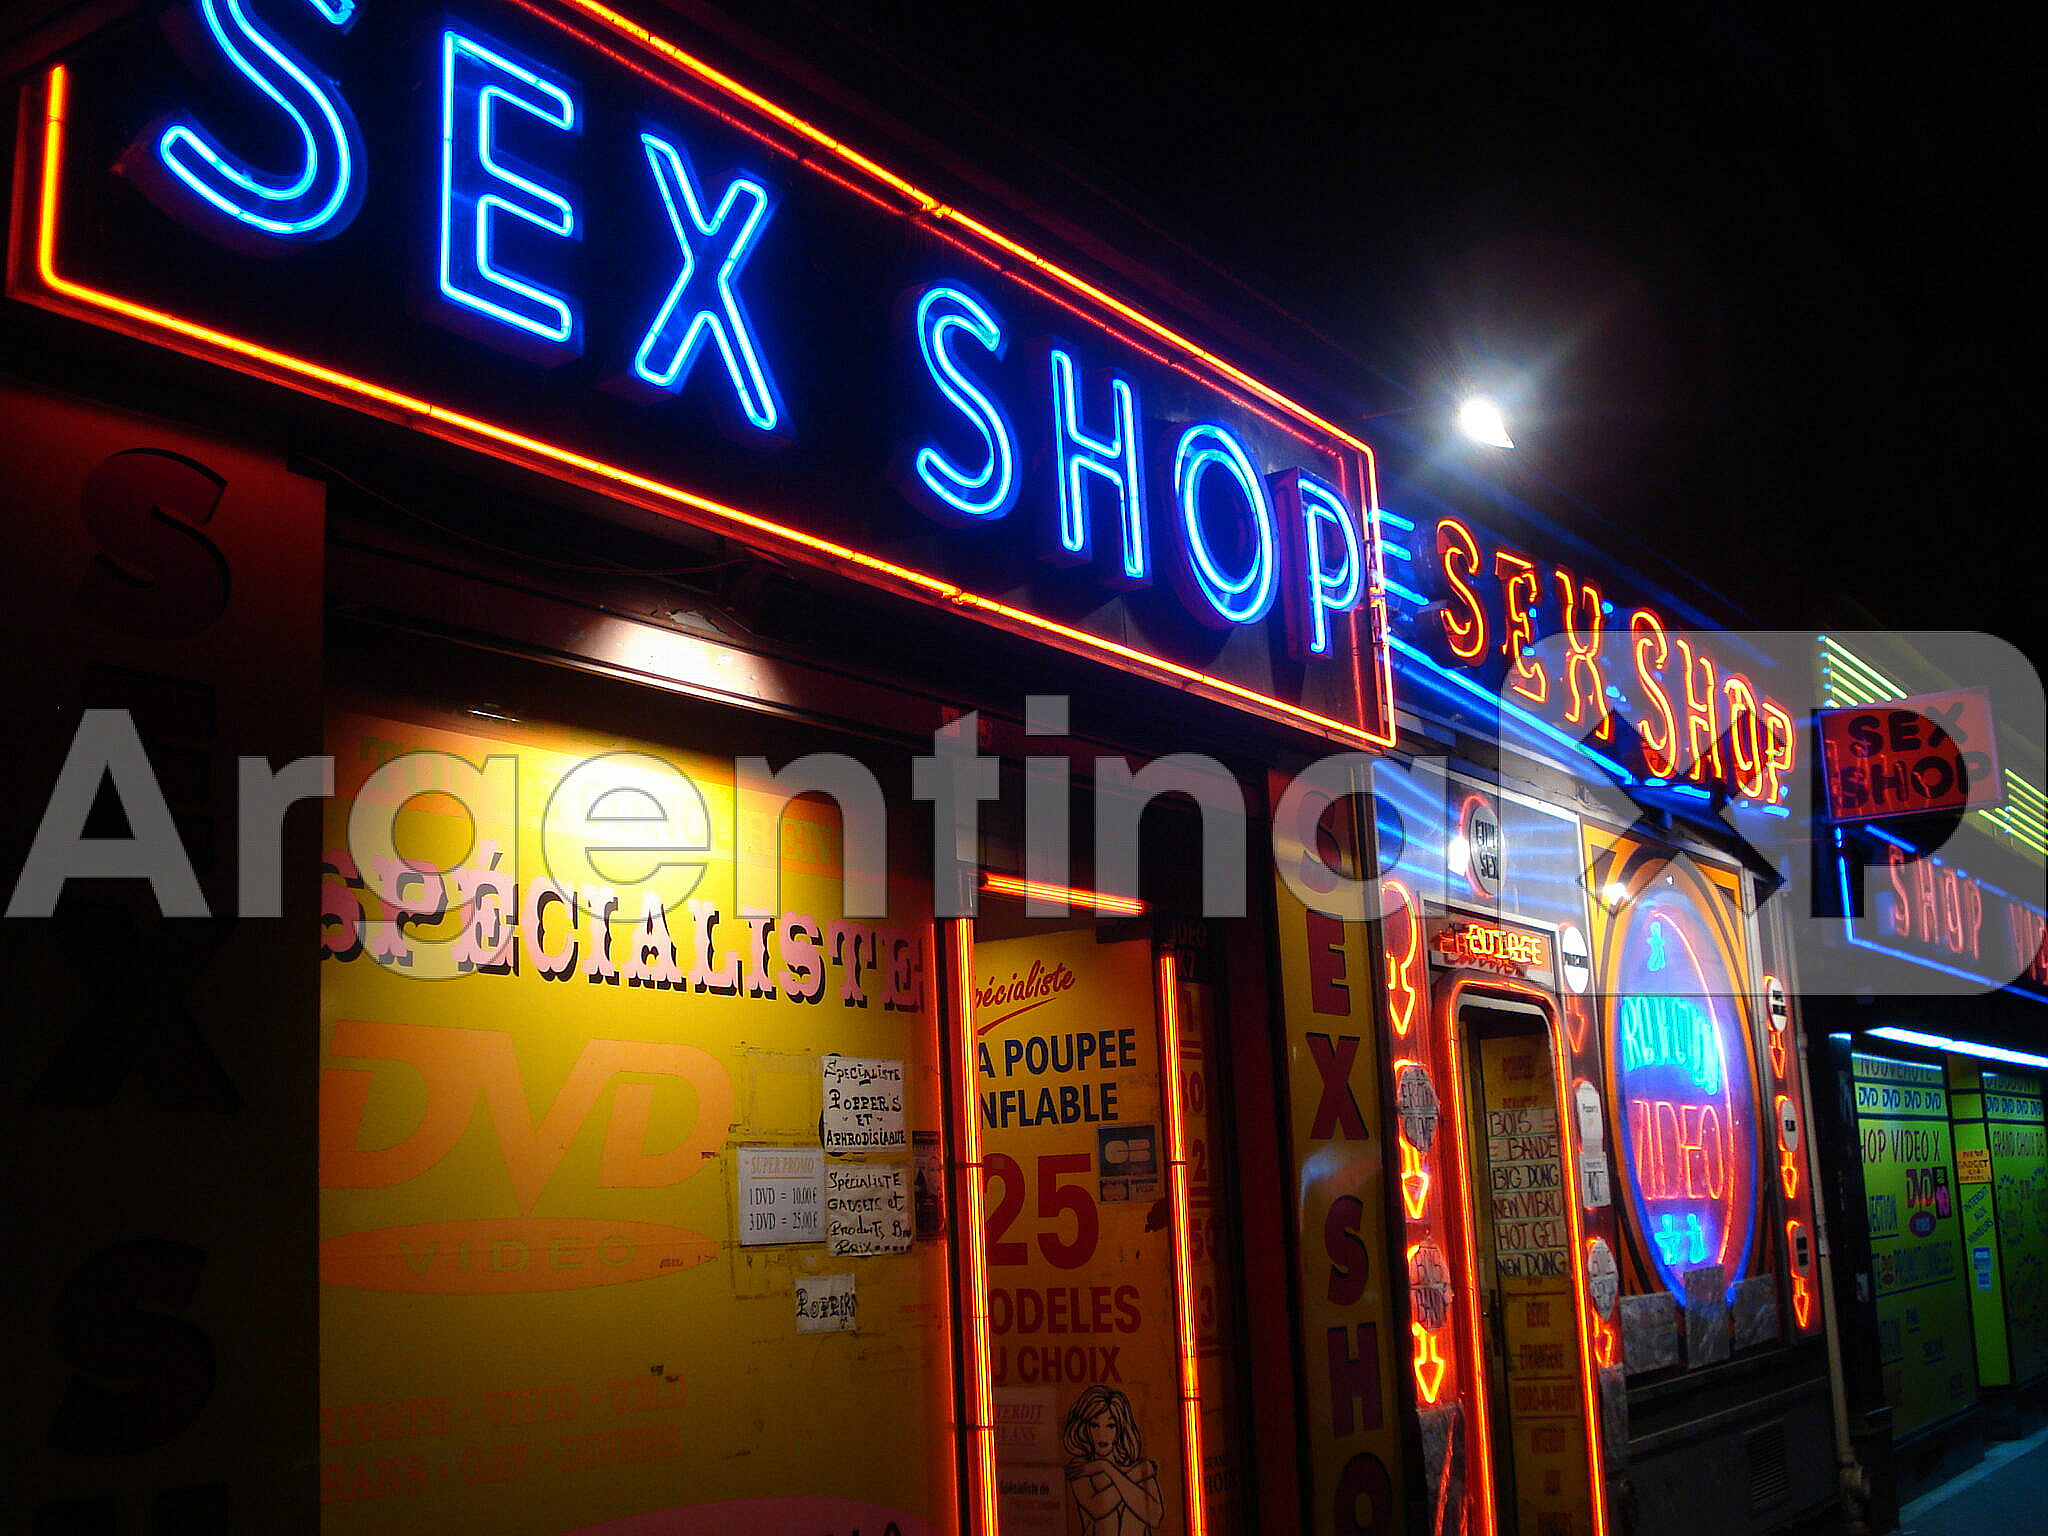 THE BIGGEST SEX SHOP IN THE WORLD WAITS FOR YOU IN JAPAN!